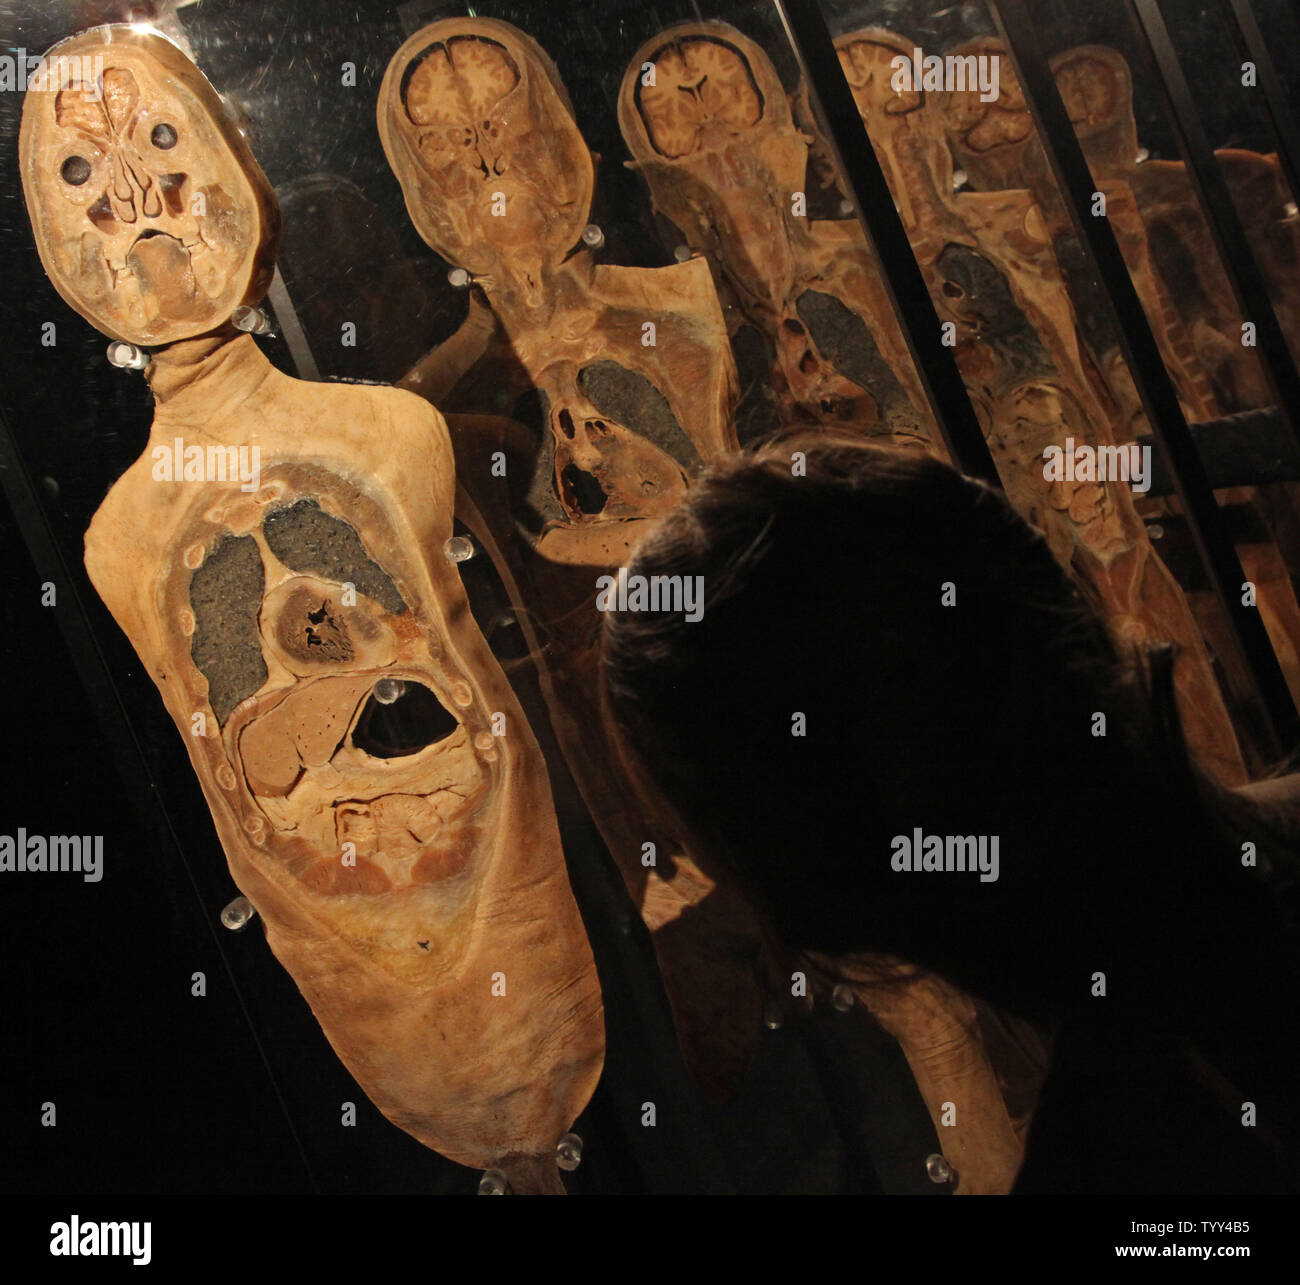 https://c8.alamy.com/comp/TYY4B5/a-museum-visitor-looks-at-cross-sections-of-a-preserved-chinese-cadaver-on-display-at-the-our-body-exhibition-taking-place-in-paris-on-april-15-2009-the-exhibition-has-sparked-controversy-over-ethical-implications-of-the-displays-and-has-led-to-two-human-rights-groups-seeking-an-injunction-to-shut-it-down-upi-photo-david-silpa-TYY4B5.jpg